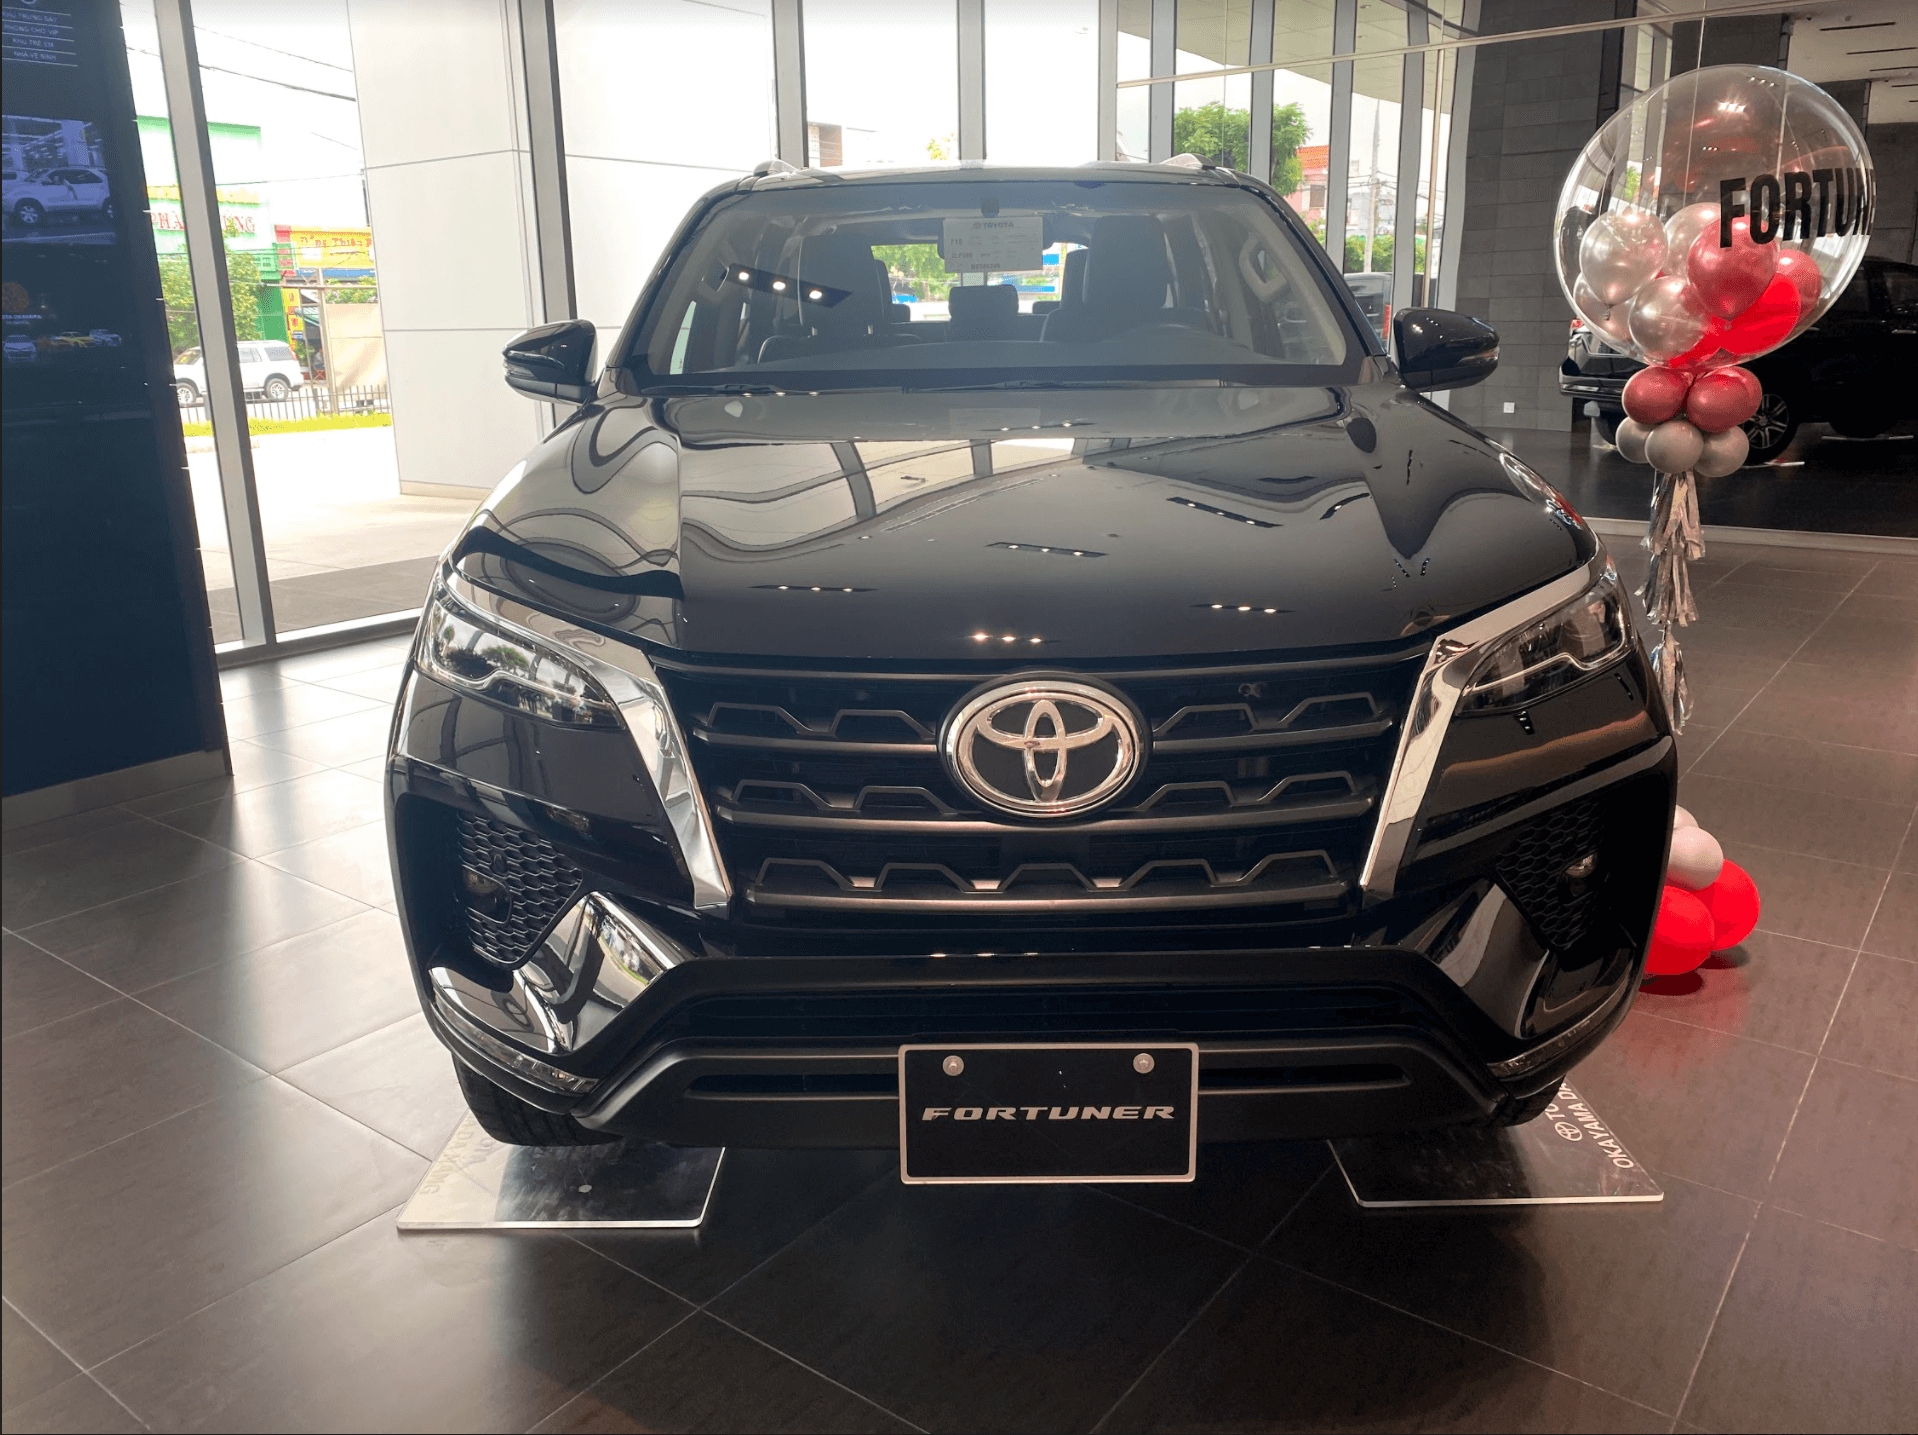 Toyota fortuner is equipped with a prominent grille